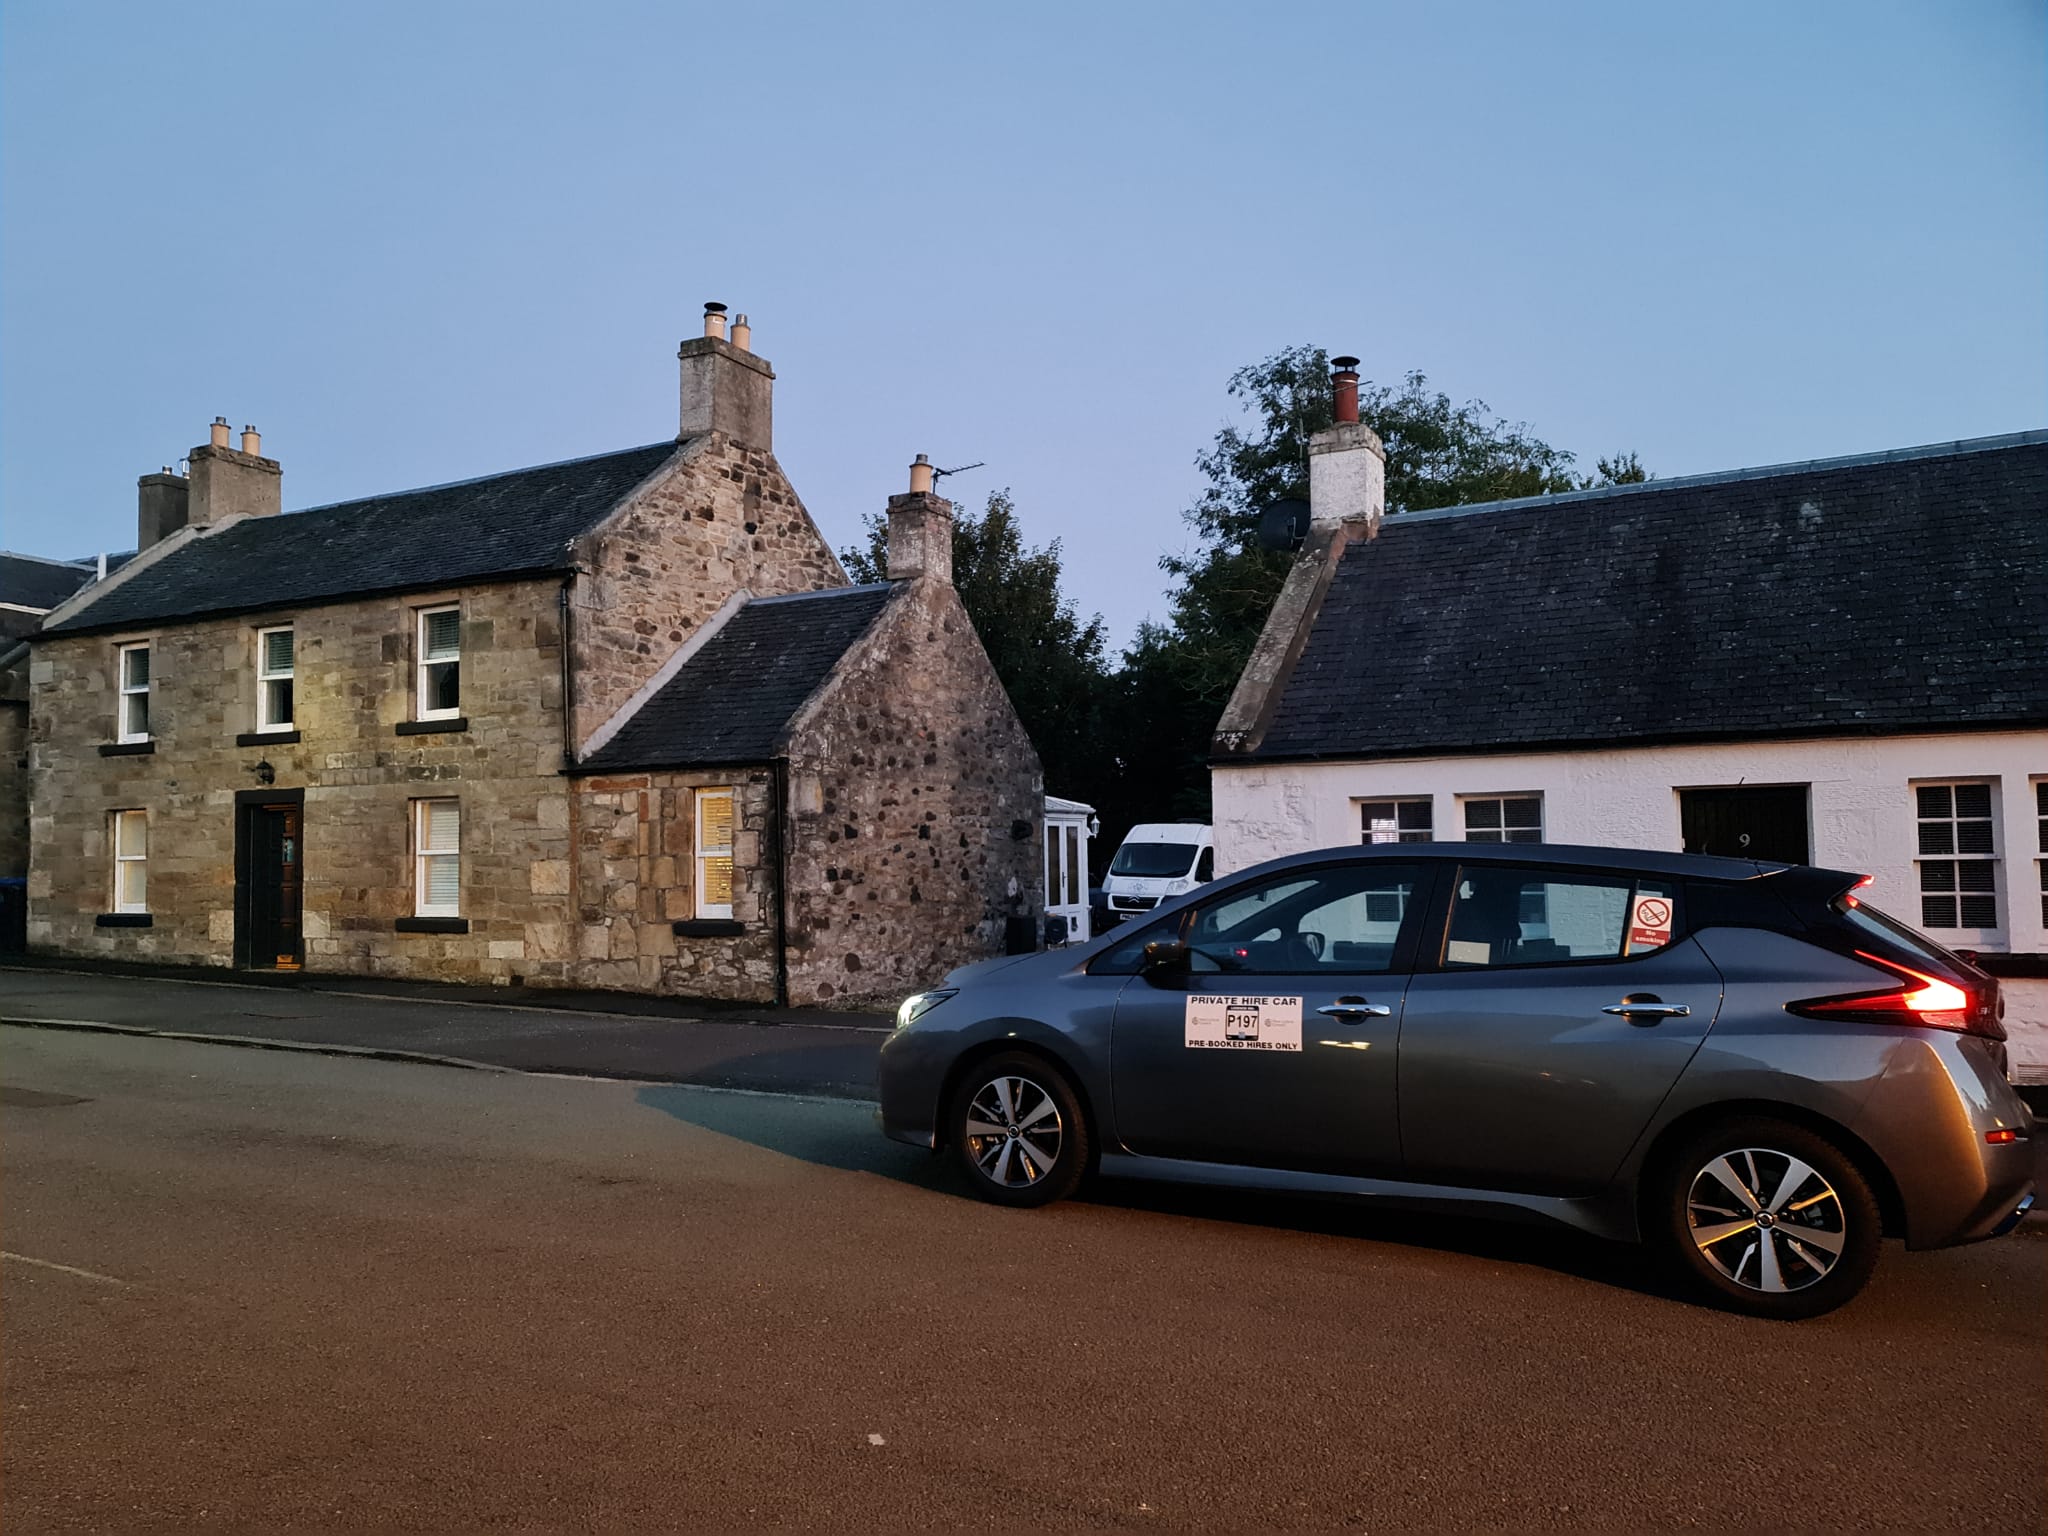 24 hour taxis in Livingston with EZ CAB LTD